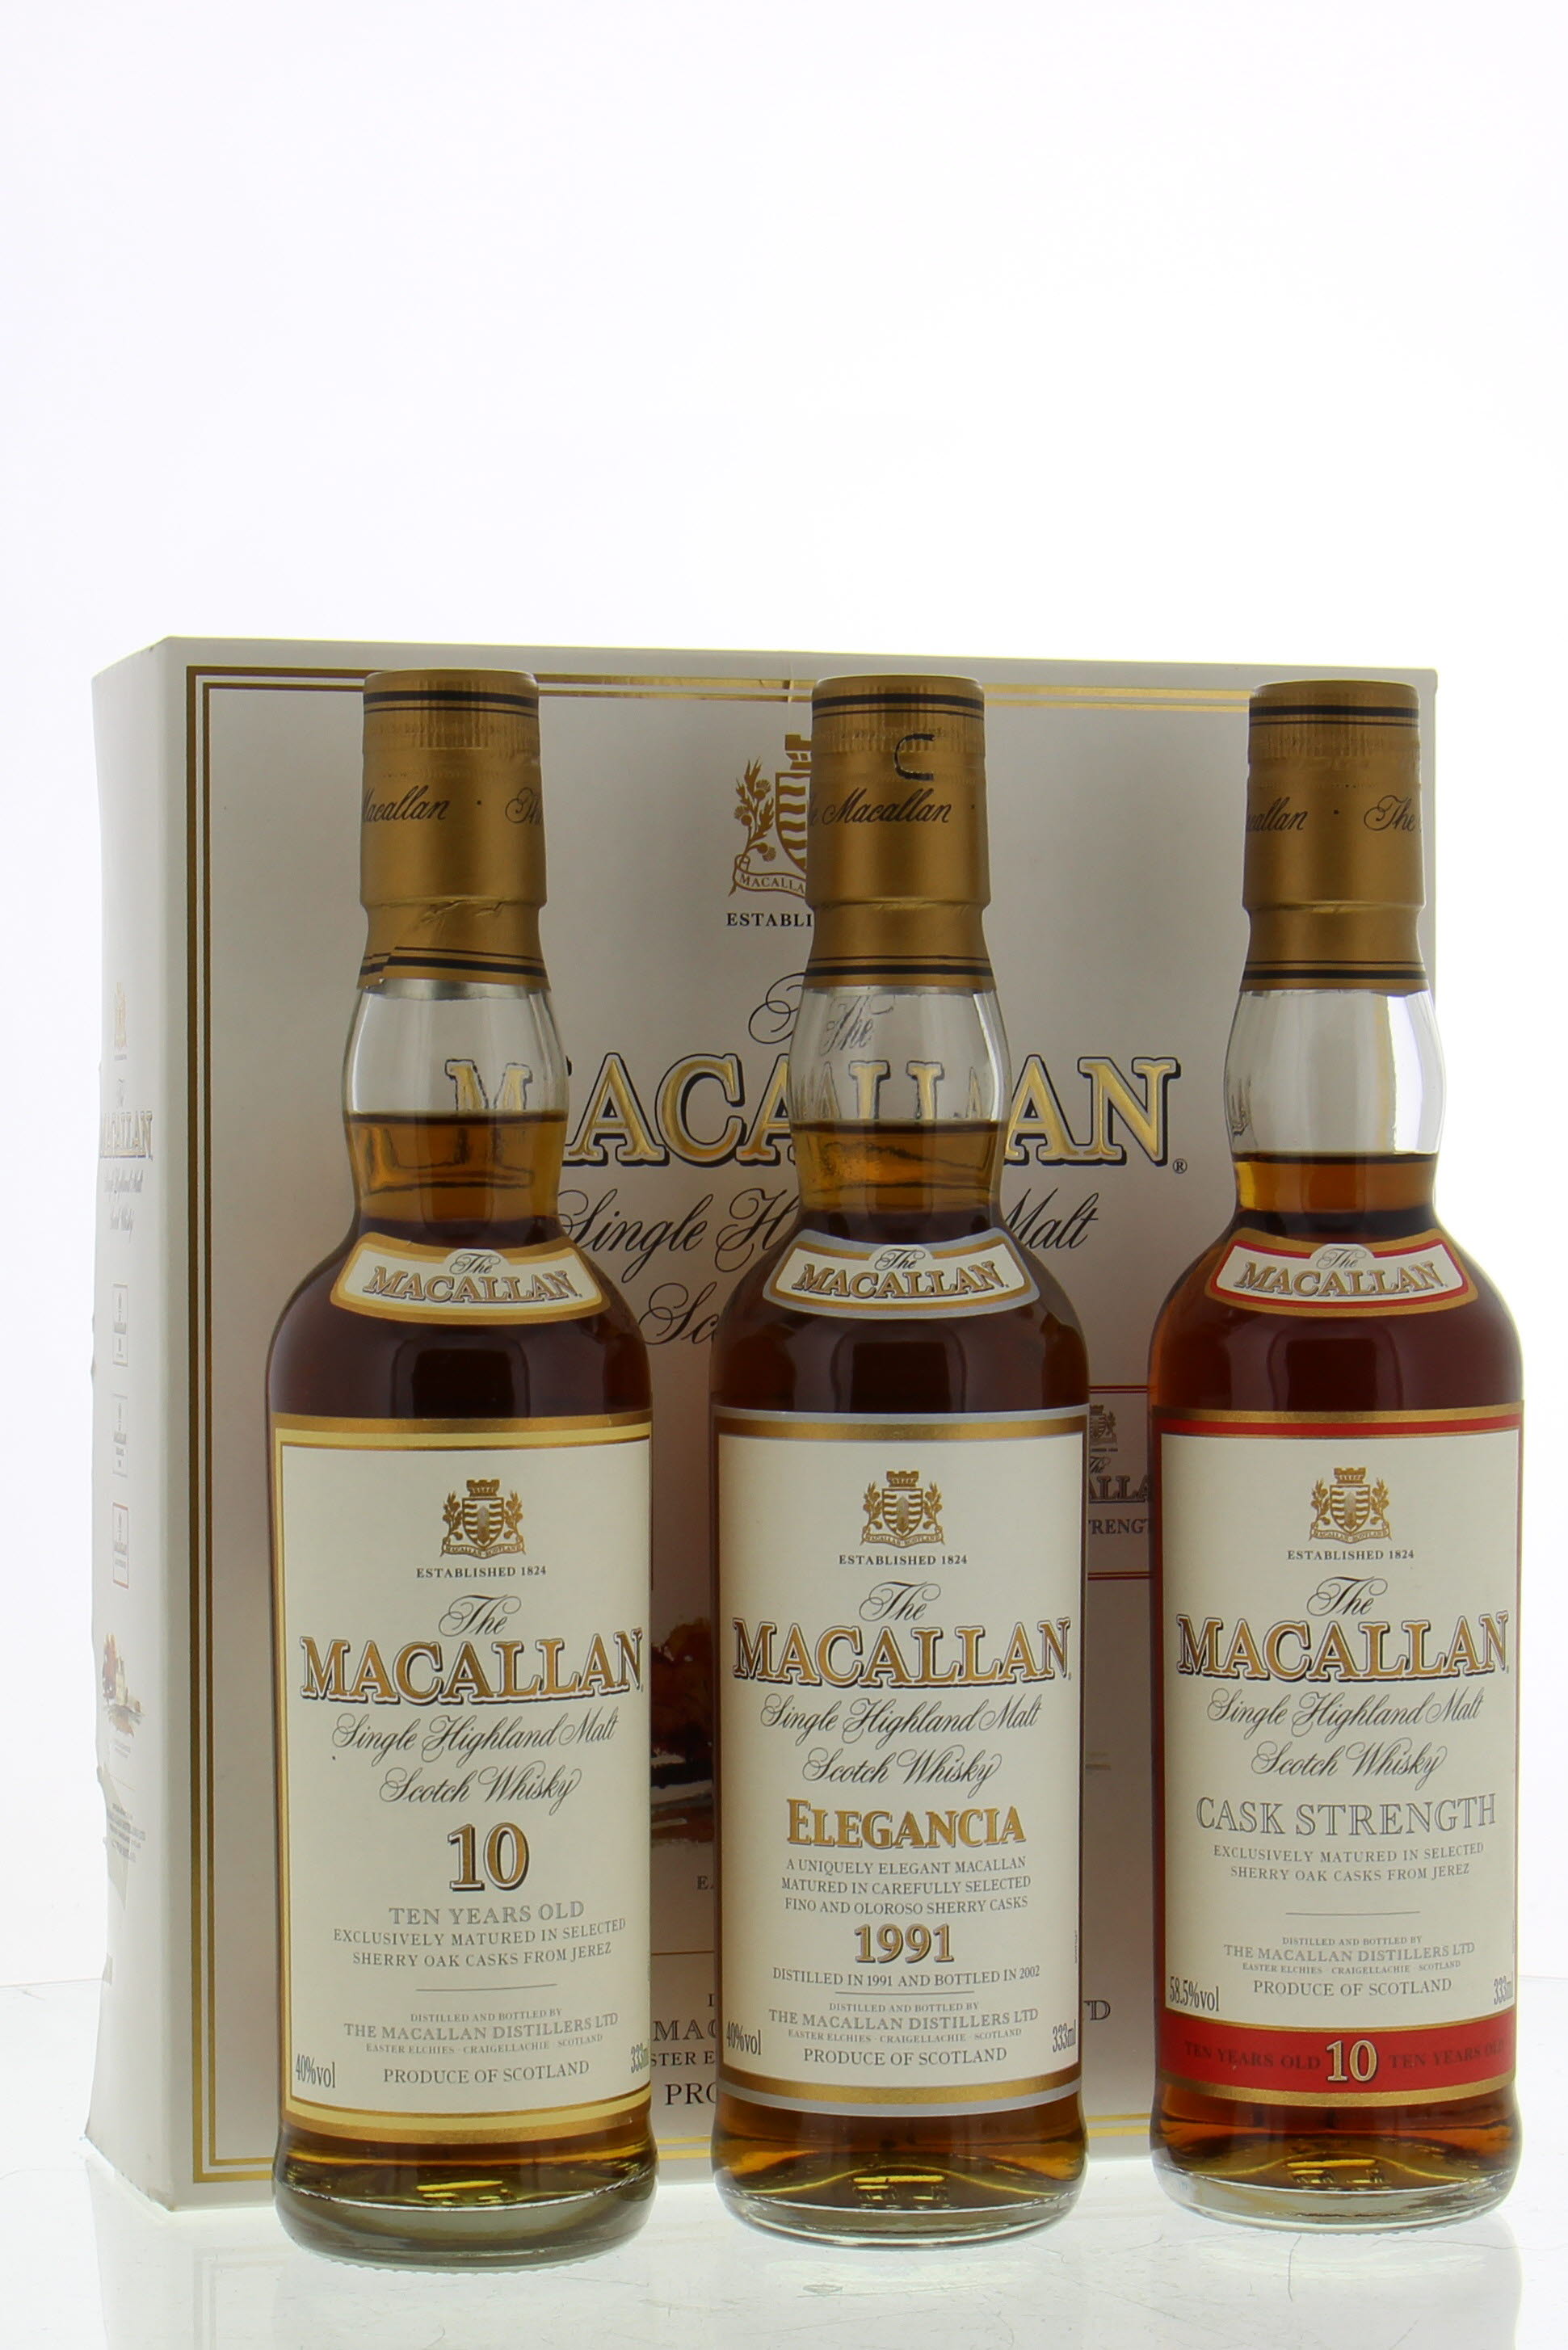 Macallan - Giftset Elegancia 10 years old and Cask Strength 1991 Perfect